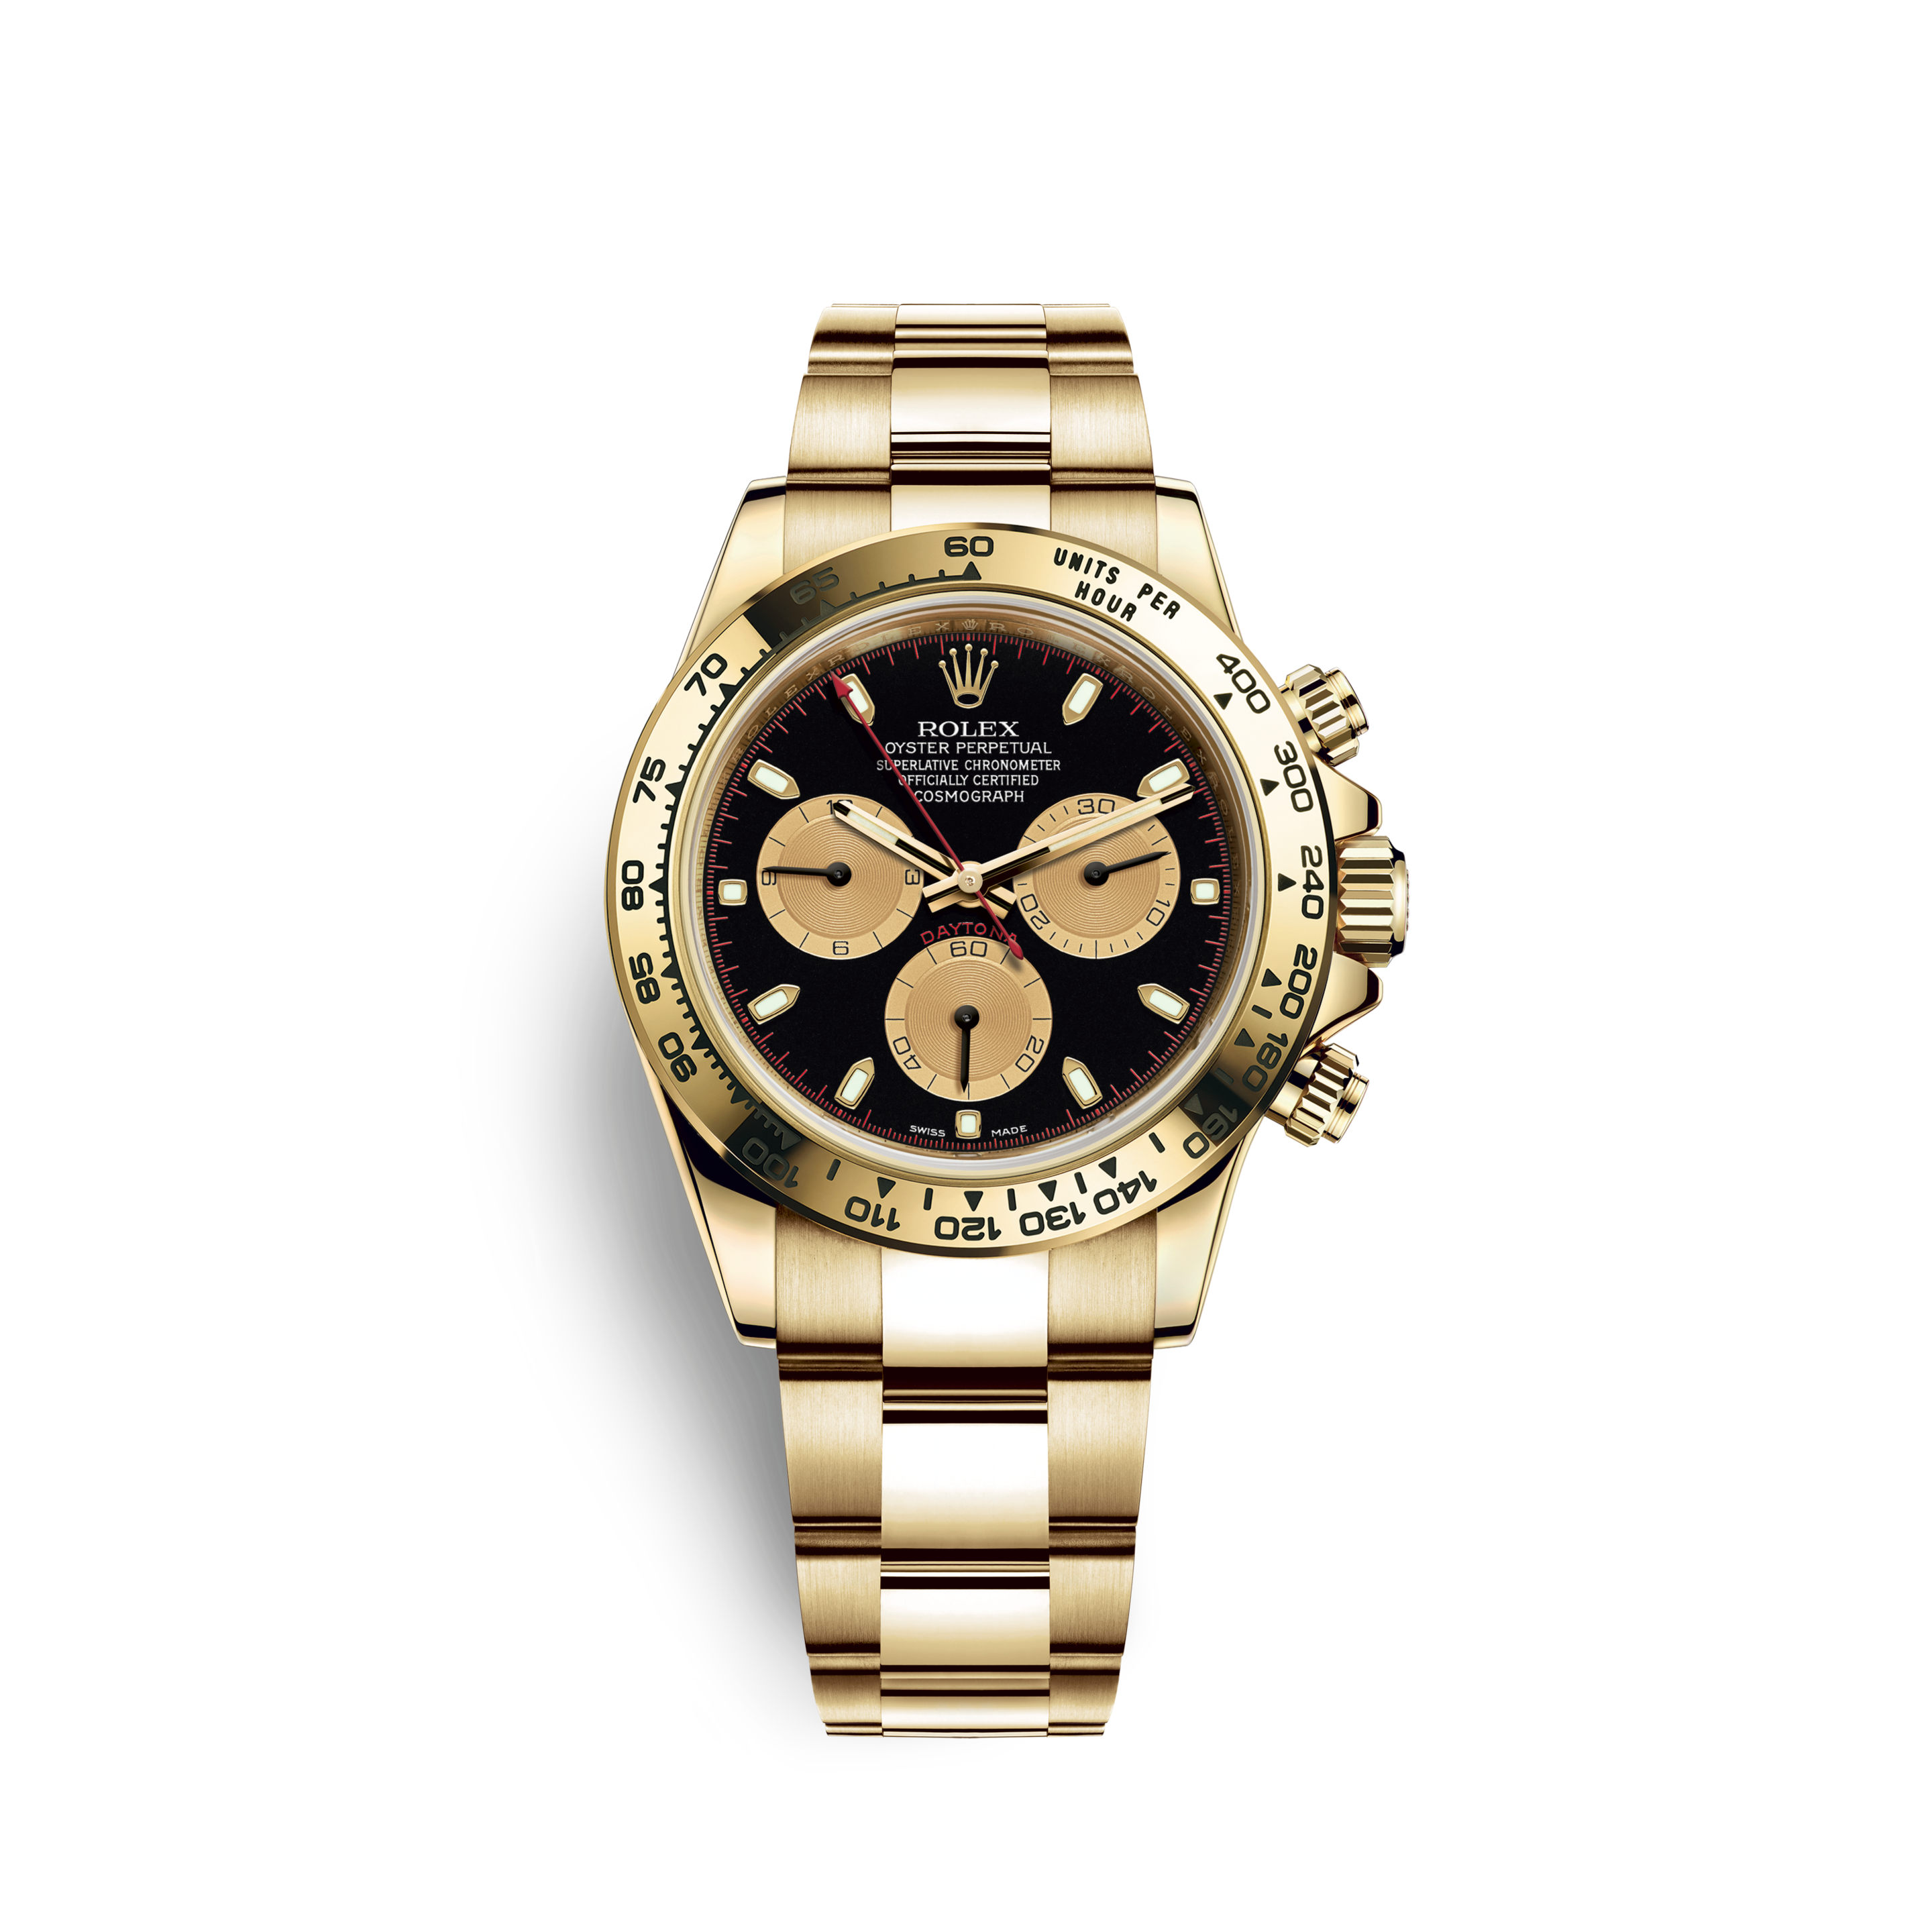 what's the price of a rolex watch